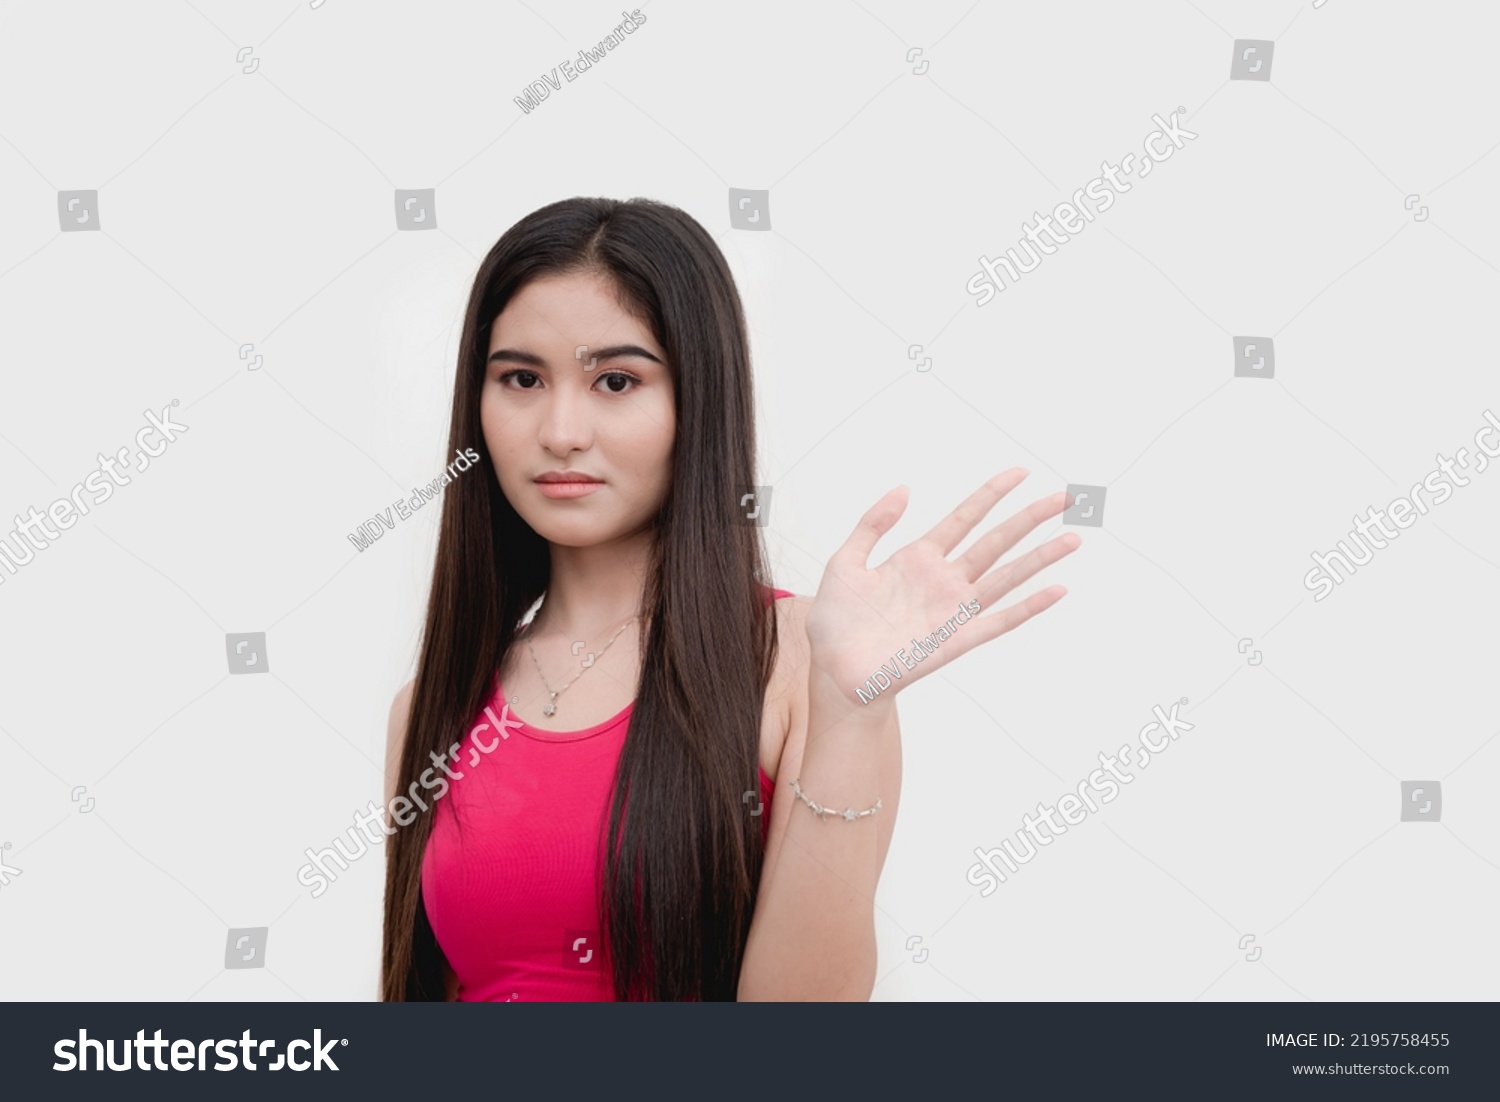 A young uneasy asian woman waving someone off expressing disinterest or apprehensiveness. Isolated on a white backdrop. #2195758455